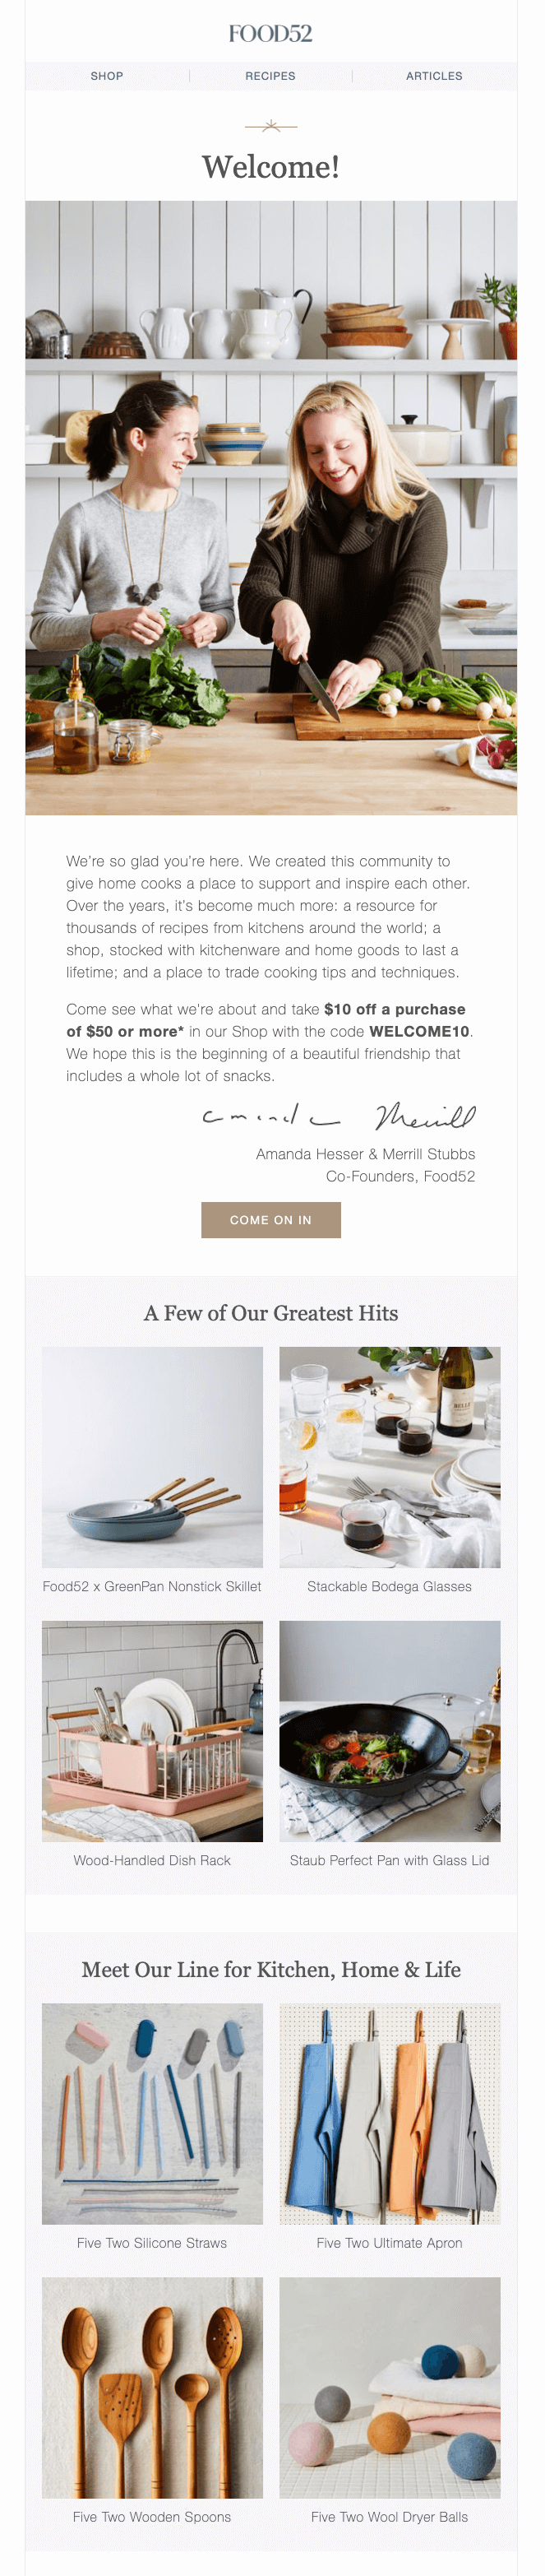 Welcome email from food blog and ecommerce website Food52